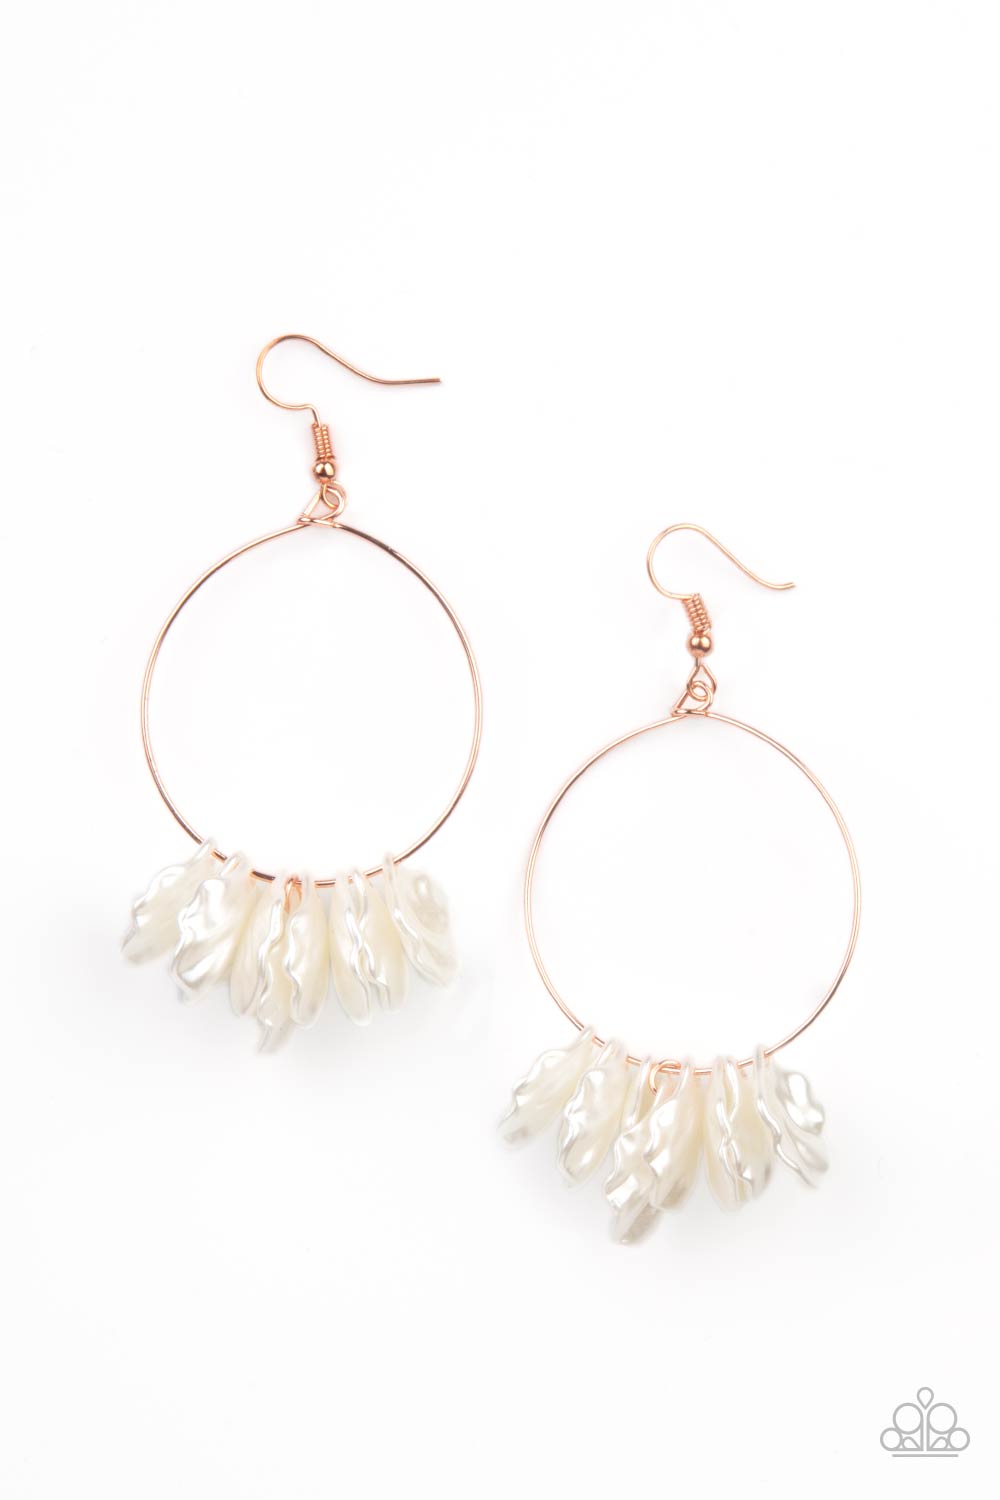 Paparazzi Accessories Sailboats and Seashells - Copper Earrings - Lady T Accessories